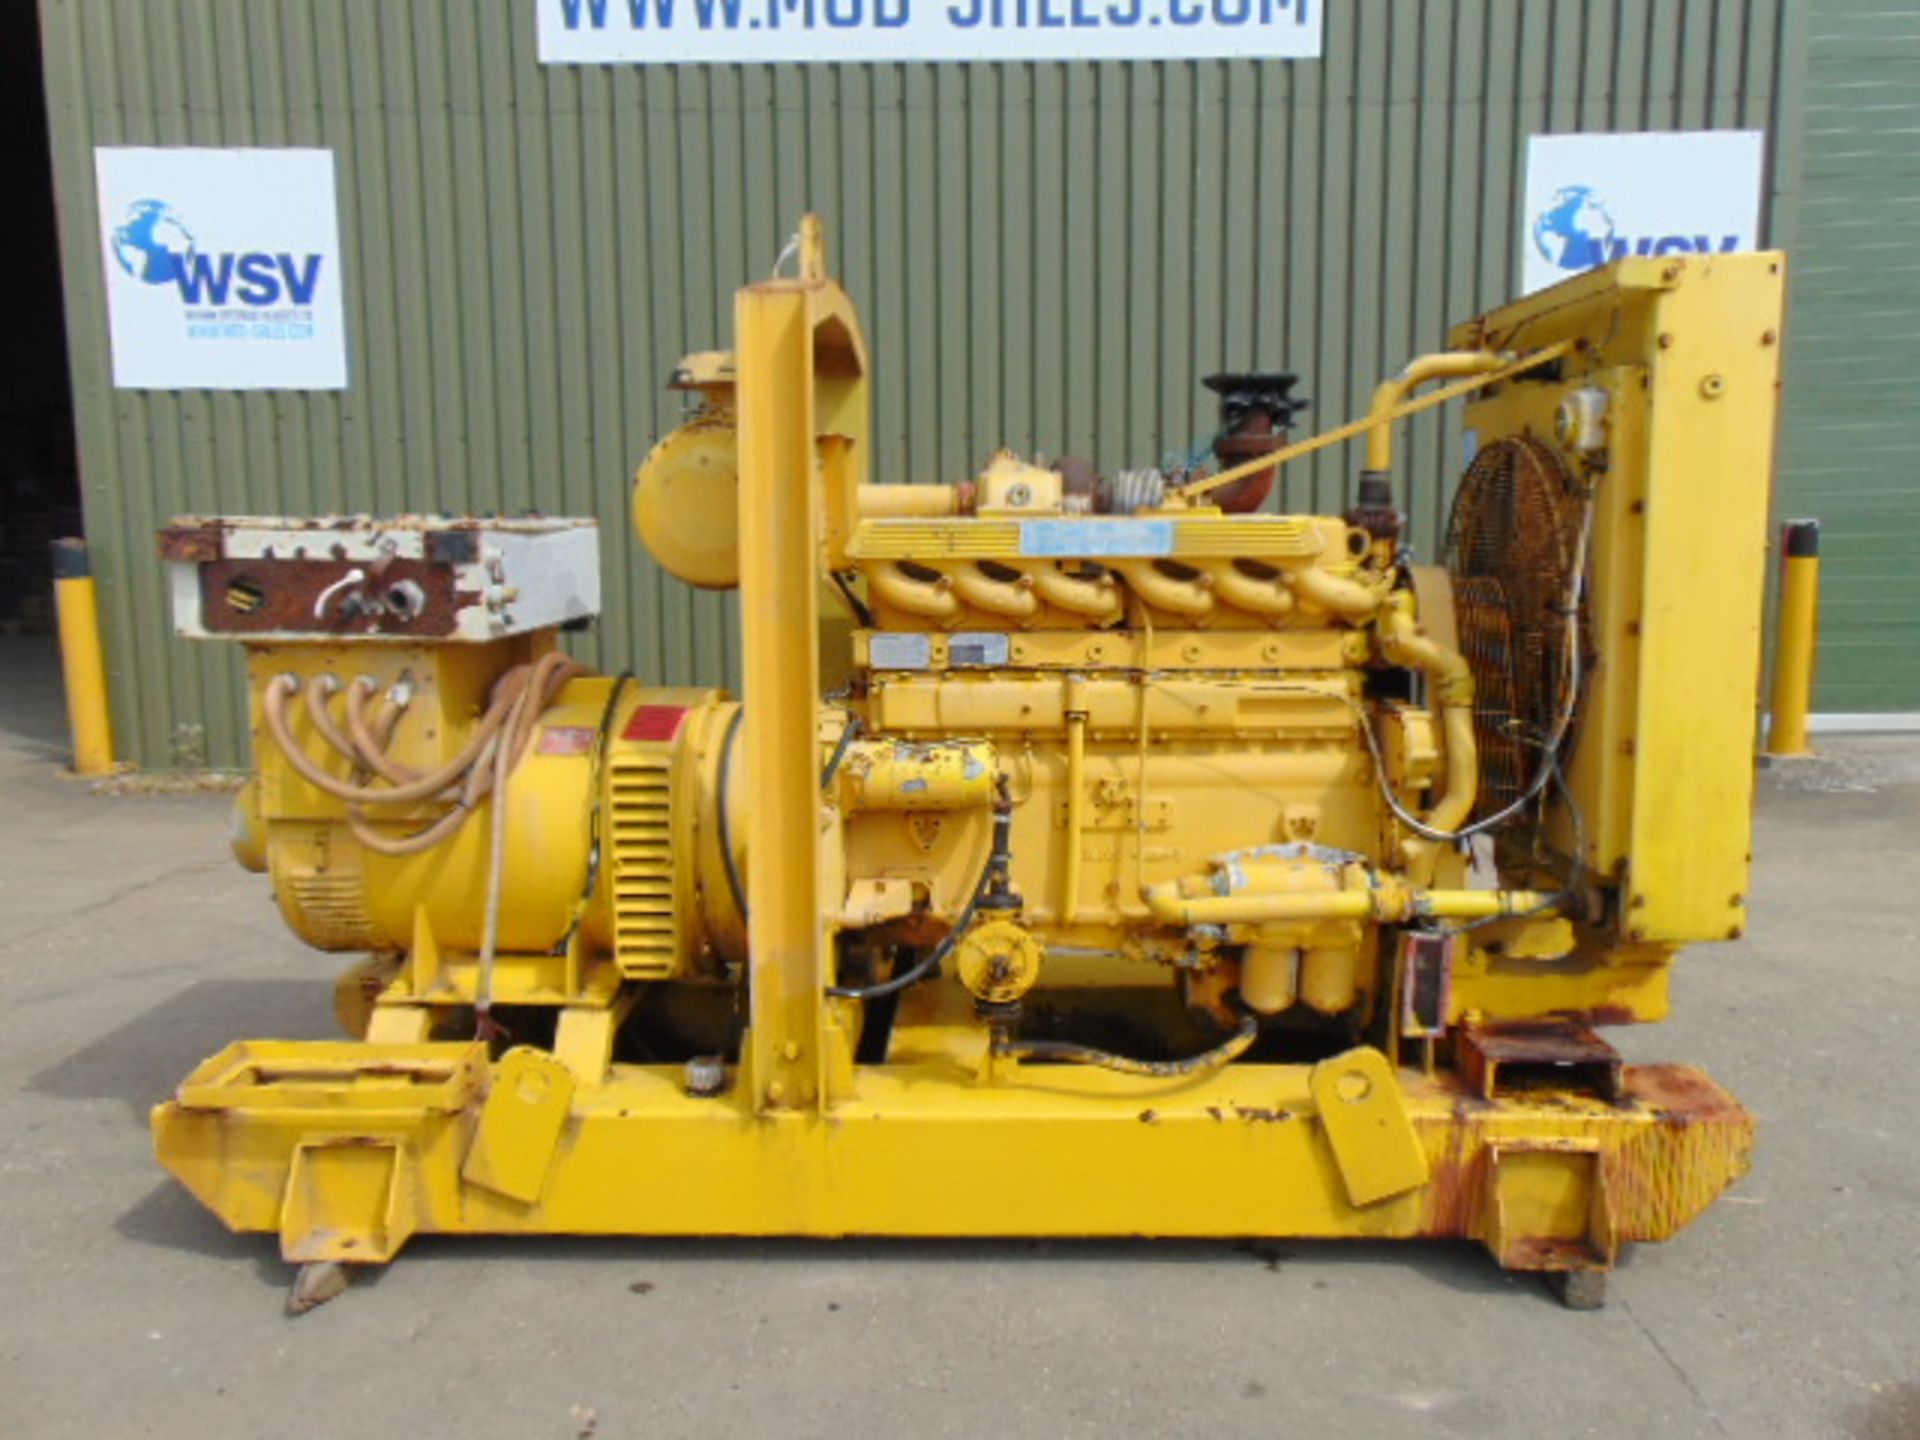 Rolls Royce Diesel Powered Newage Stamford 125KVA Generator with control panel ONLY 280 HOURS!